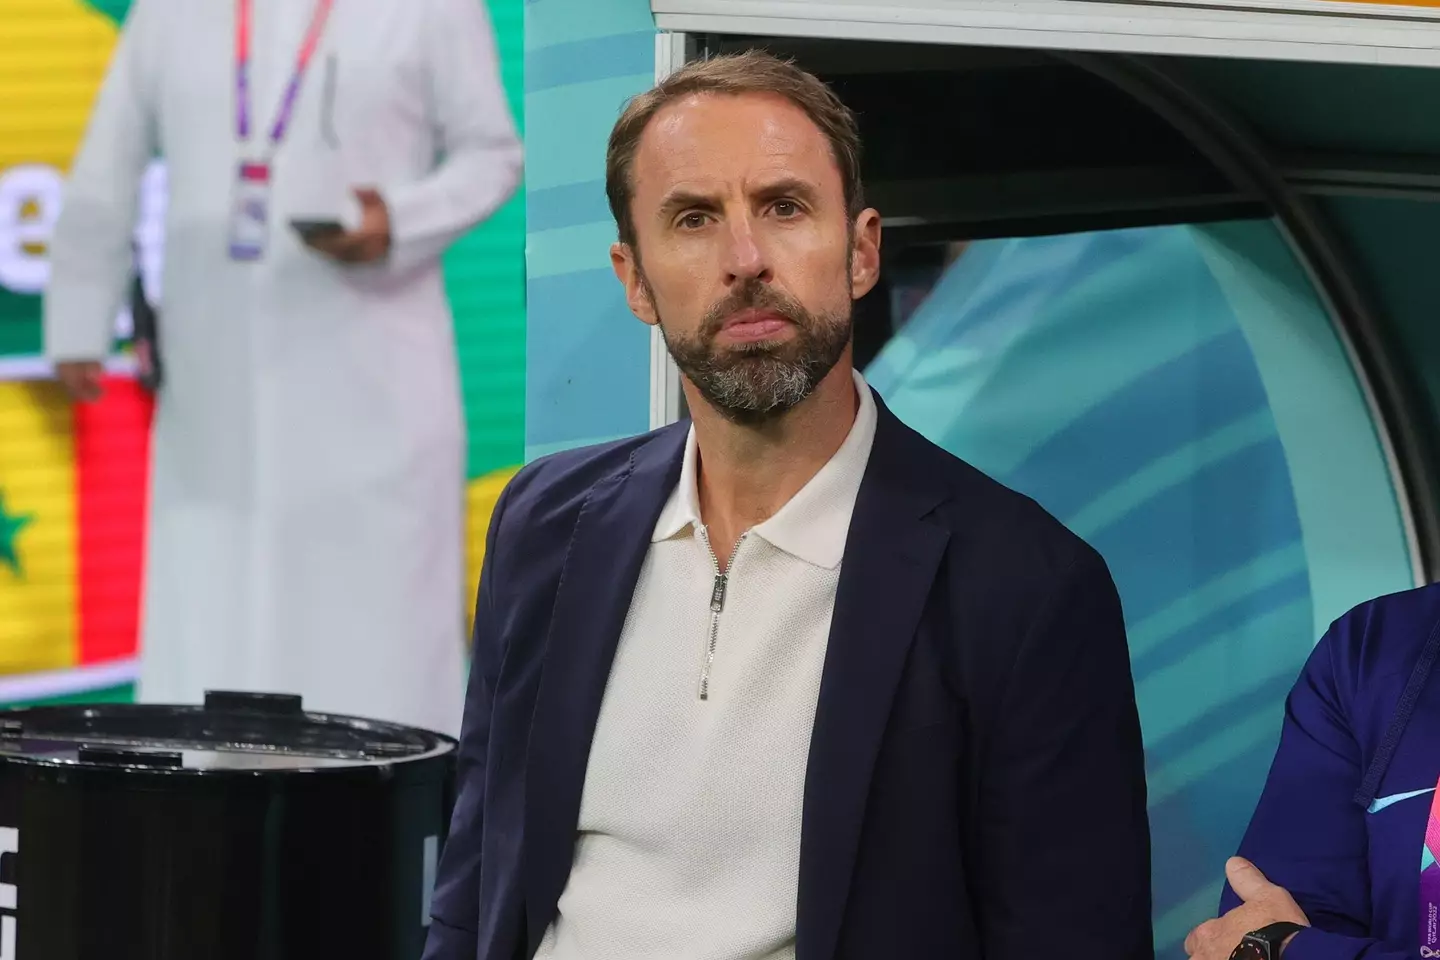 England manager Gareth Southgate is under contract with the FA until after Euro 2024.